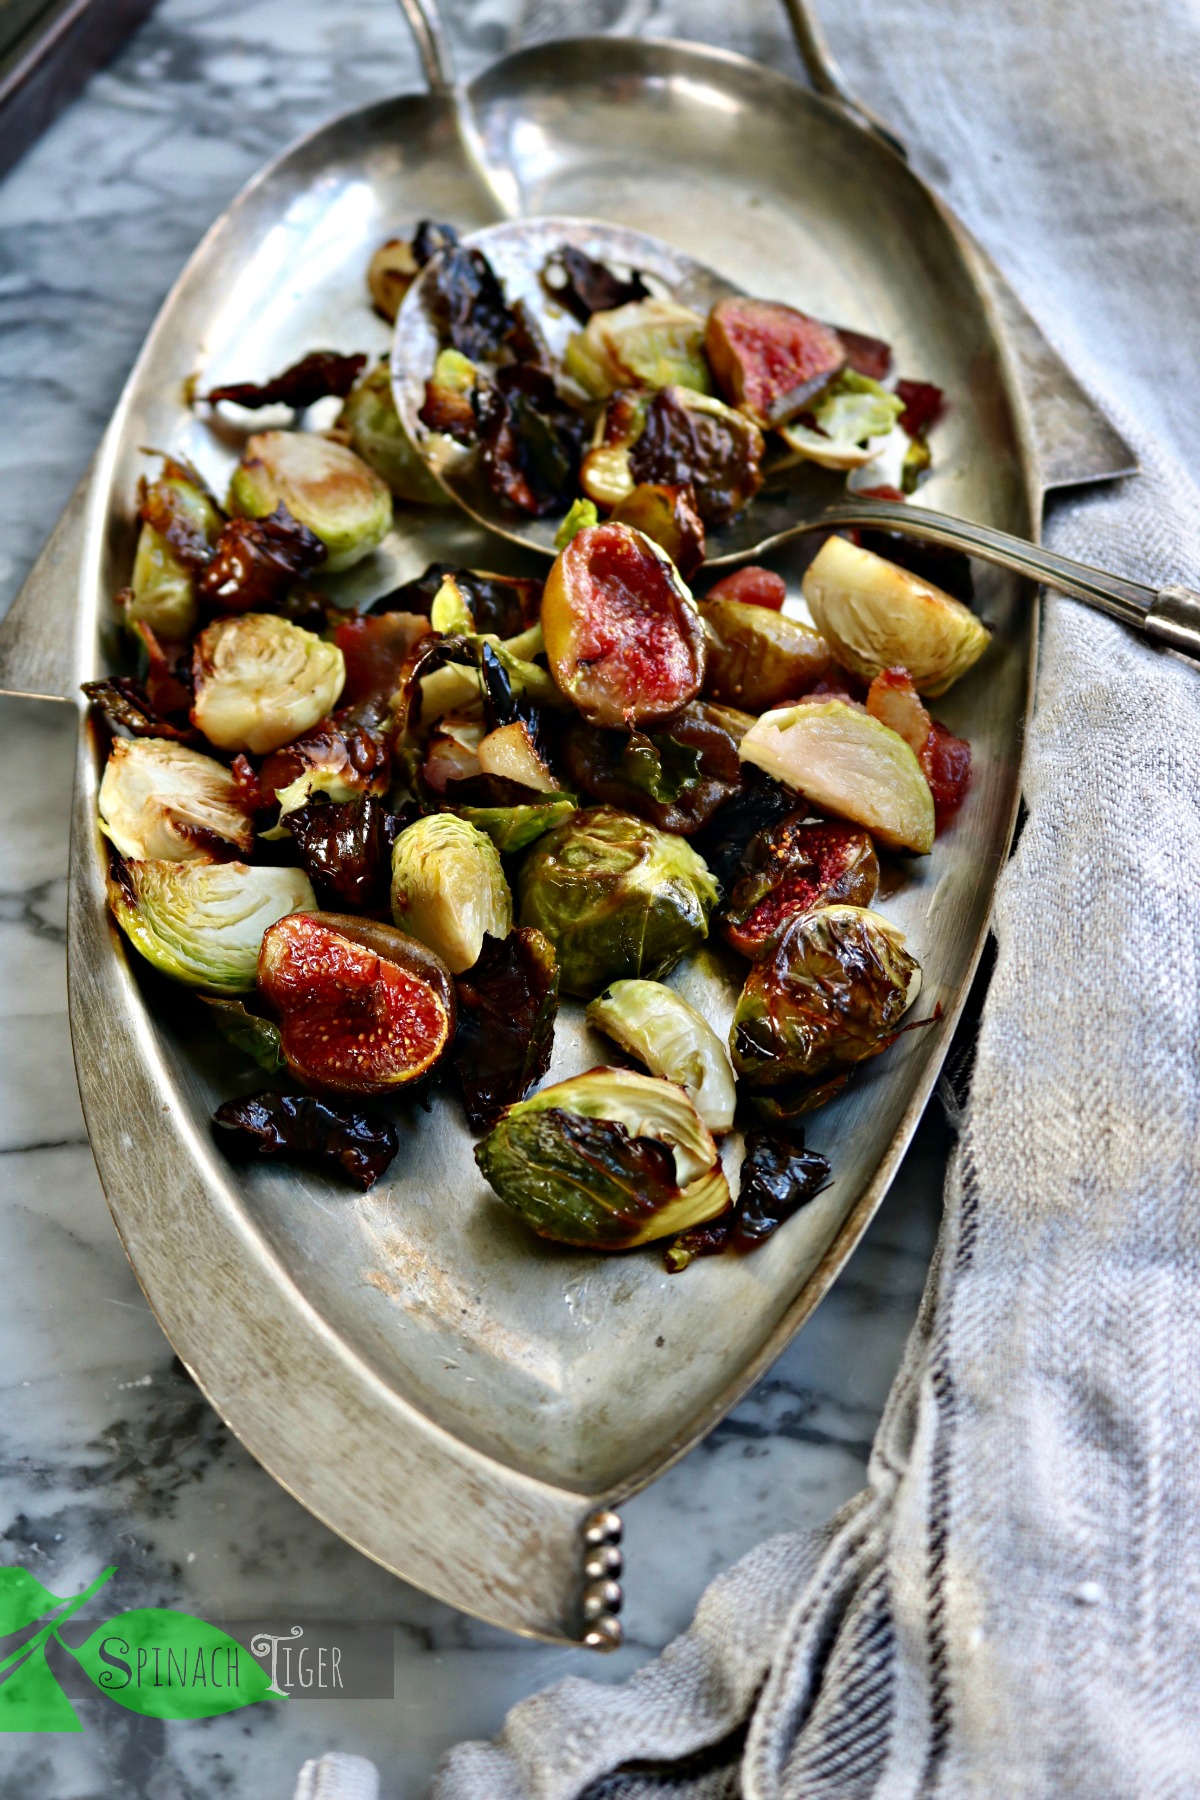 Best Brussels Sprouts Bacon Recipe from Spinach Tiger